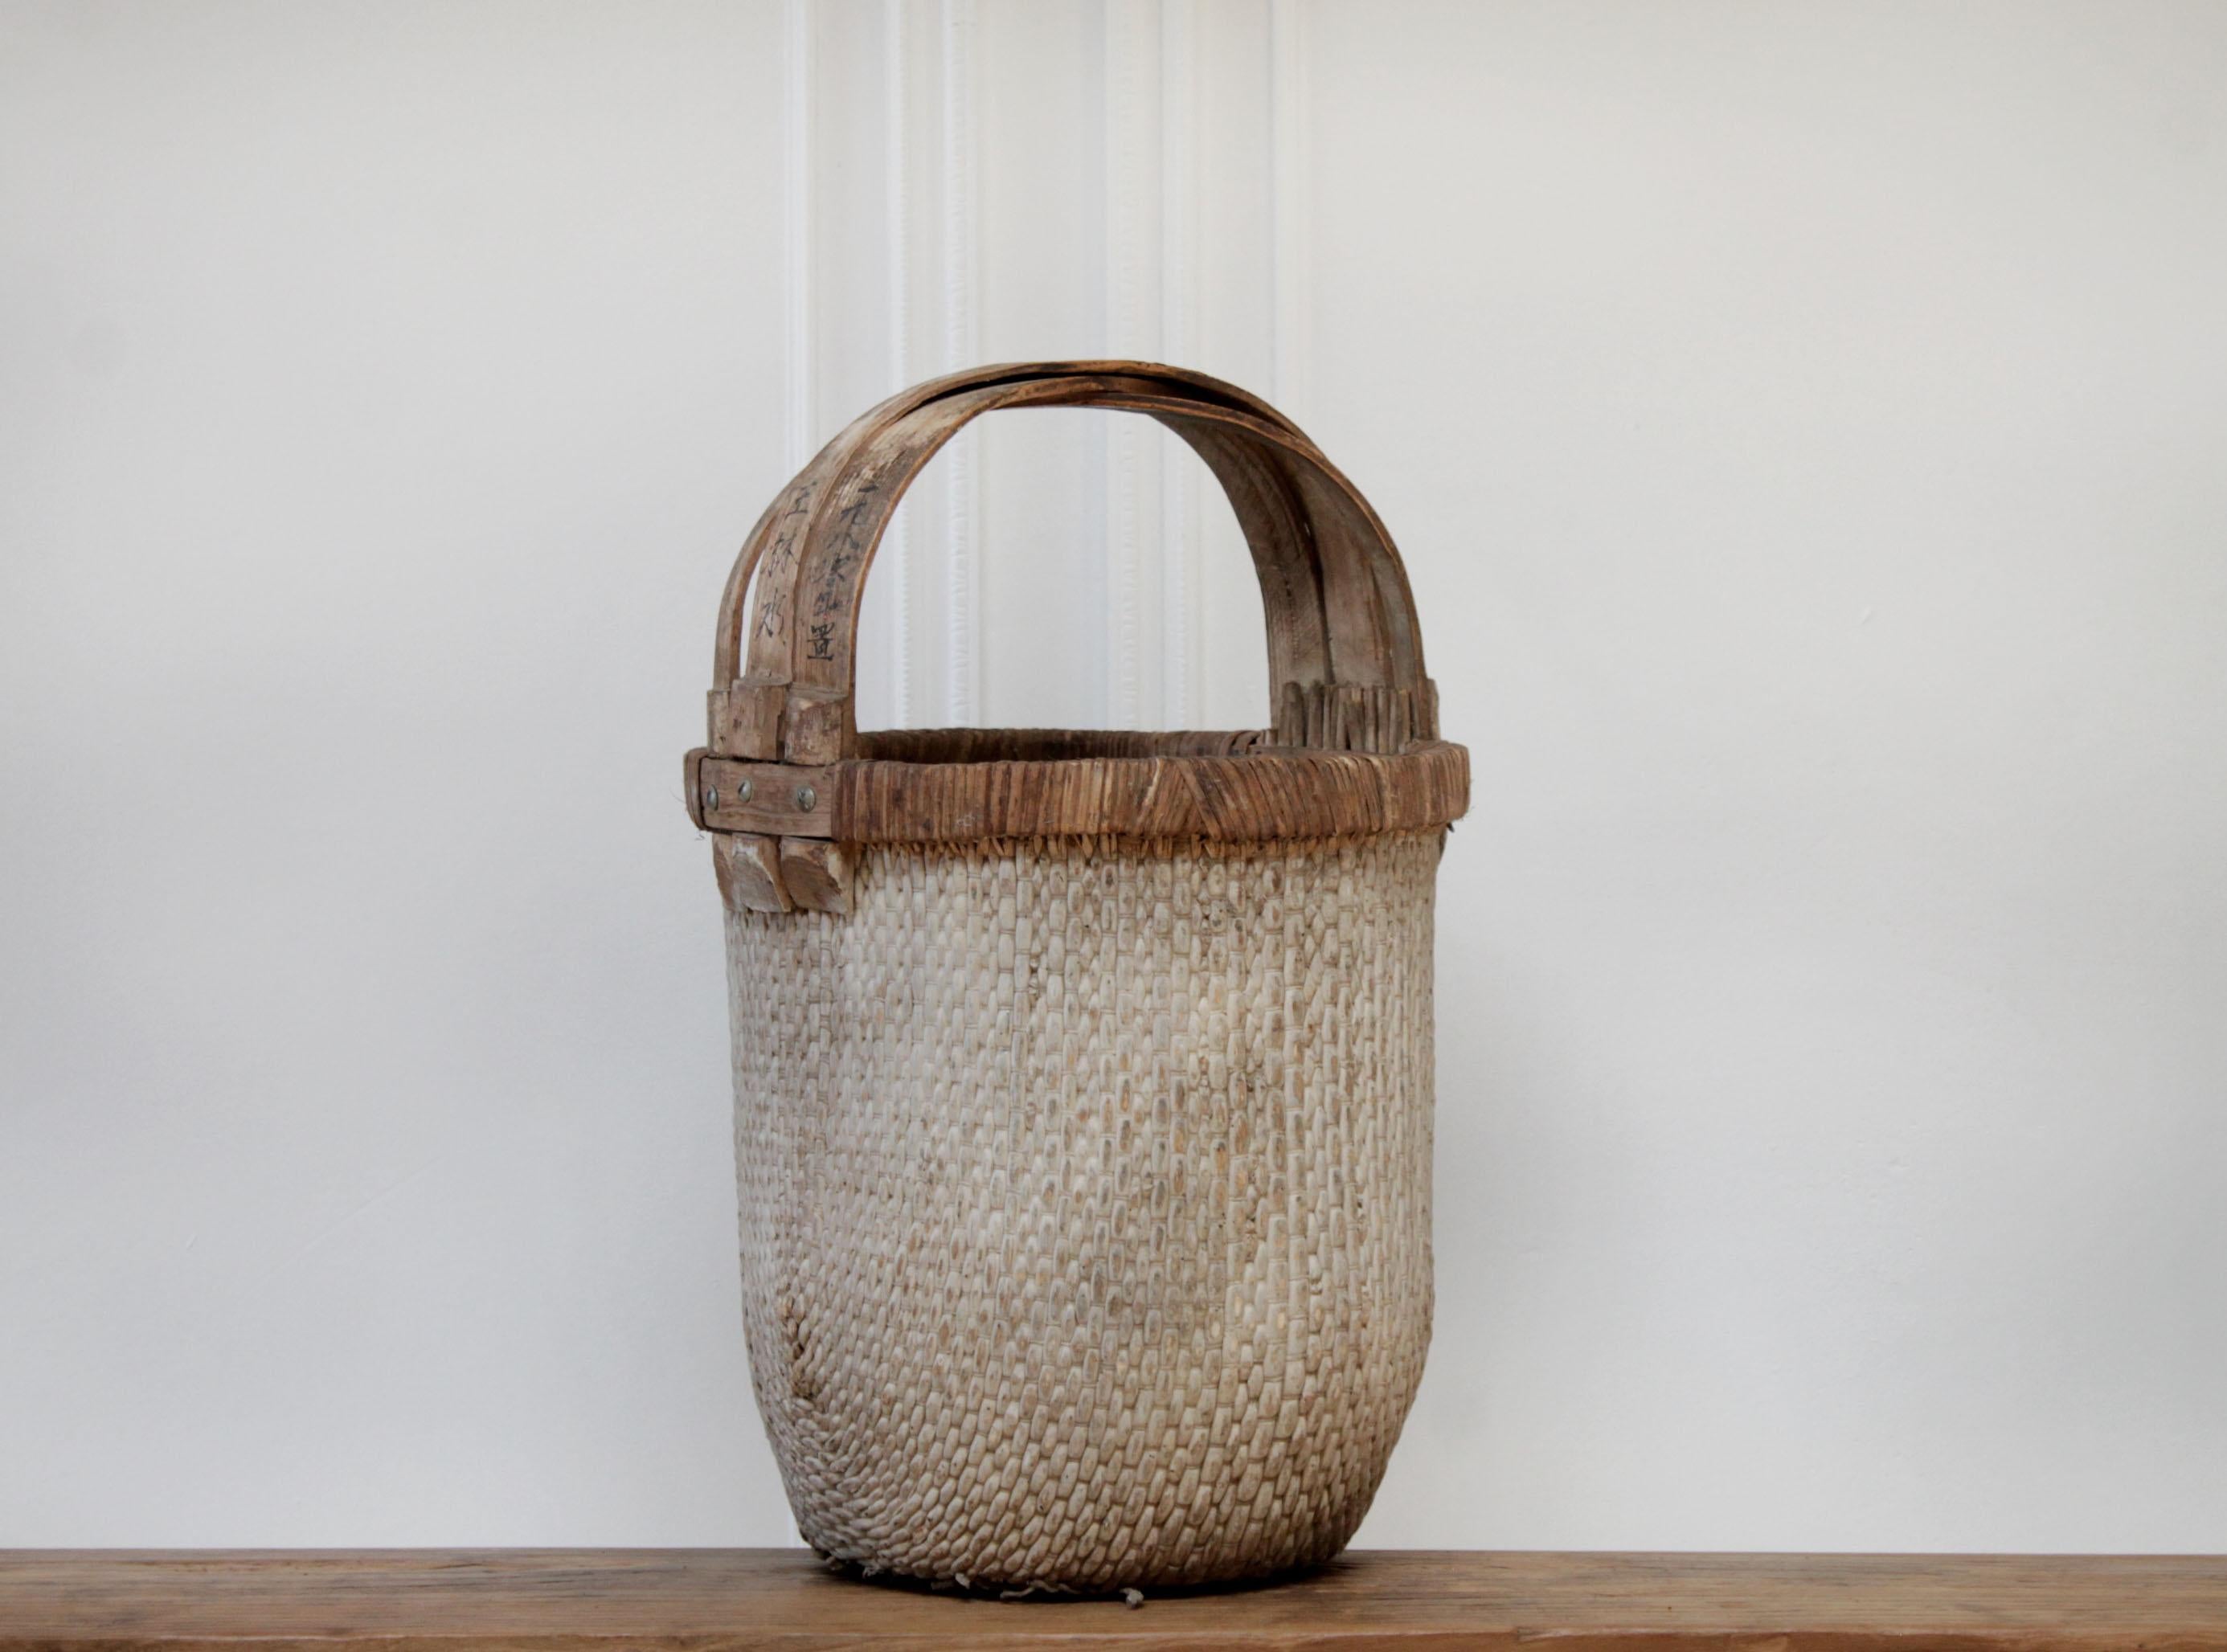 Vintage aged woven Chinese basket
Beautiful light gray exterior, with natural colored handles.
The handles say: 